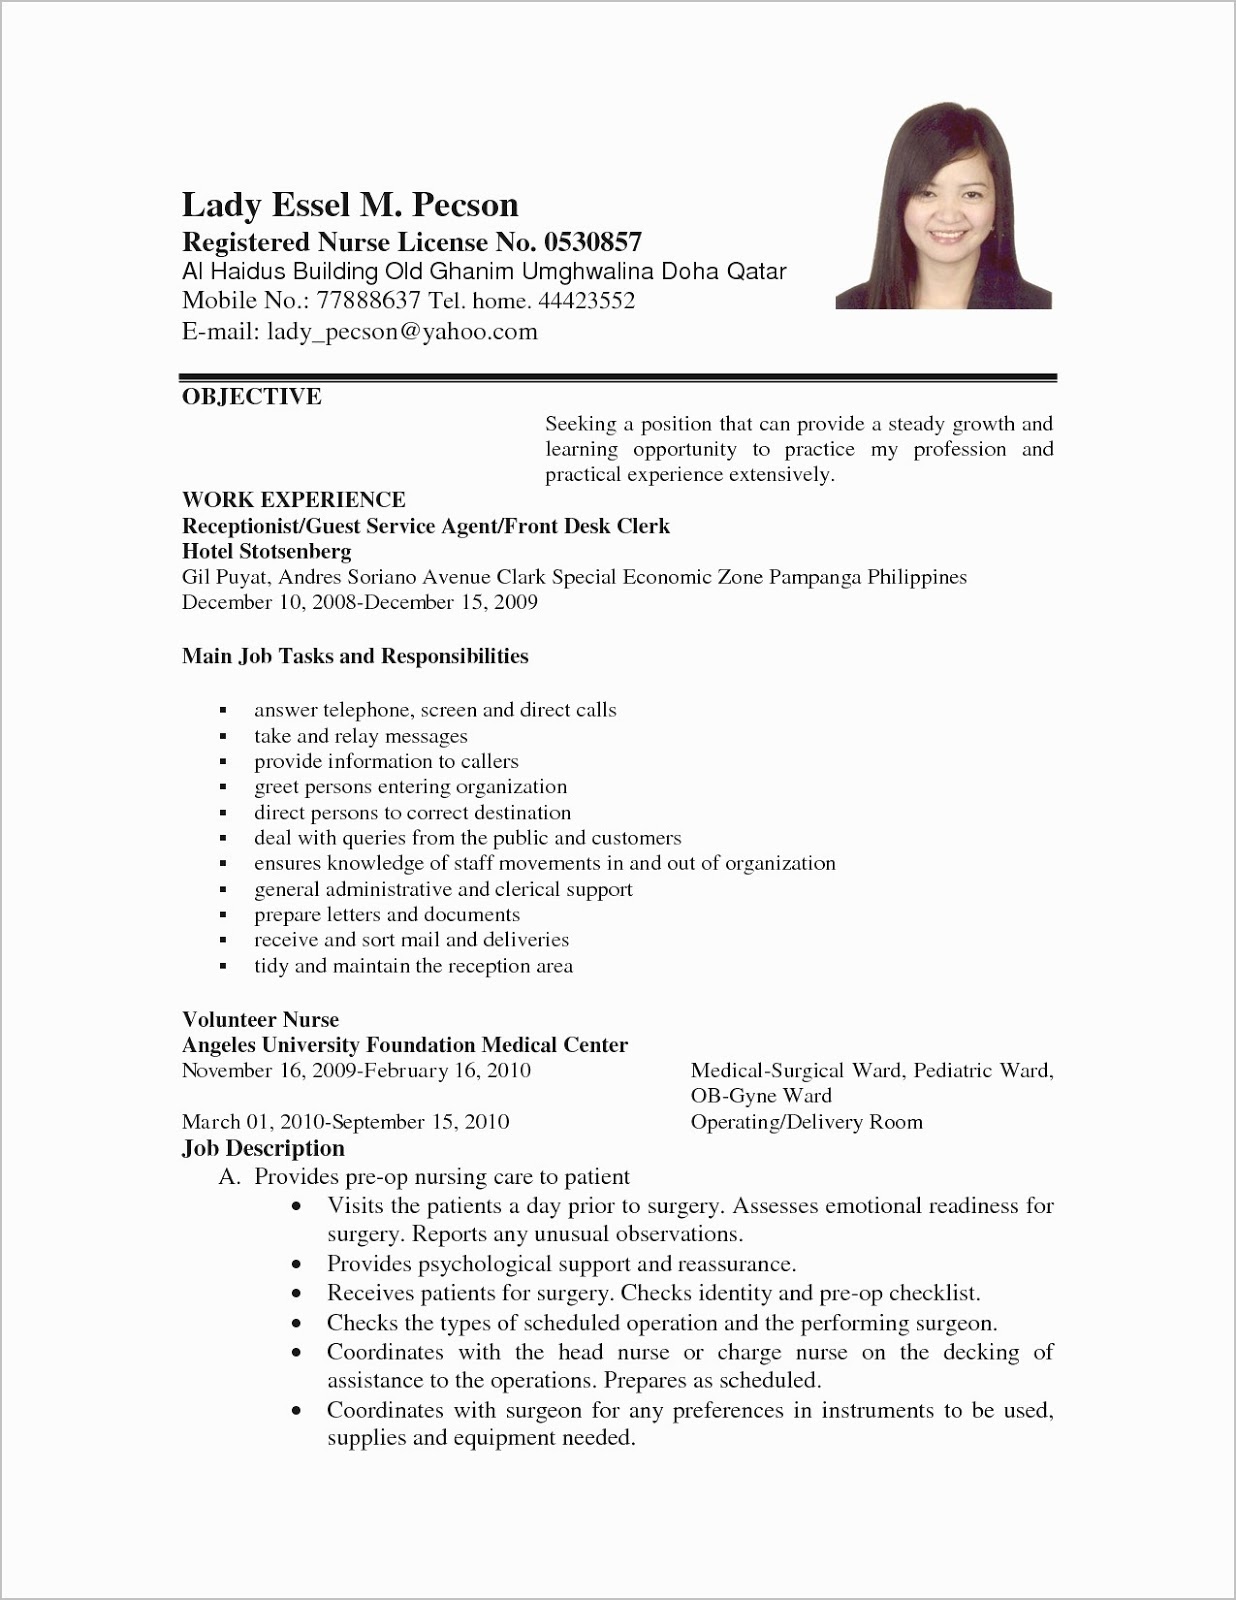 Administrative Assistant Resume Objective 2019, administrative assistant resume objective examples, administrative assistant resume objective samples 2020